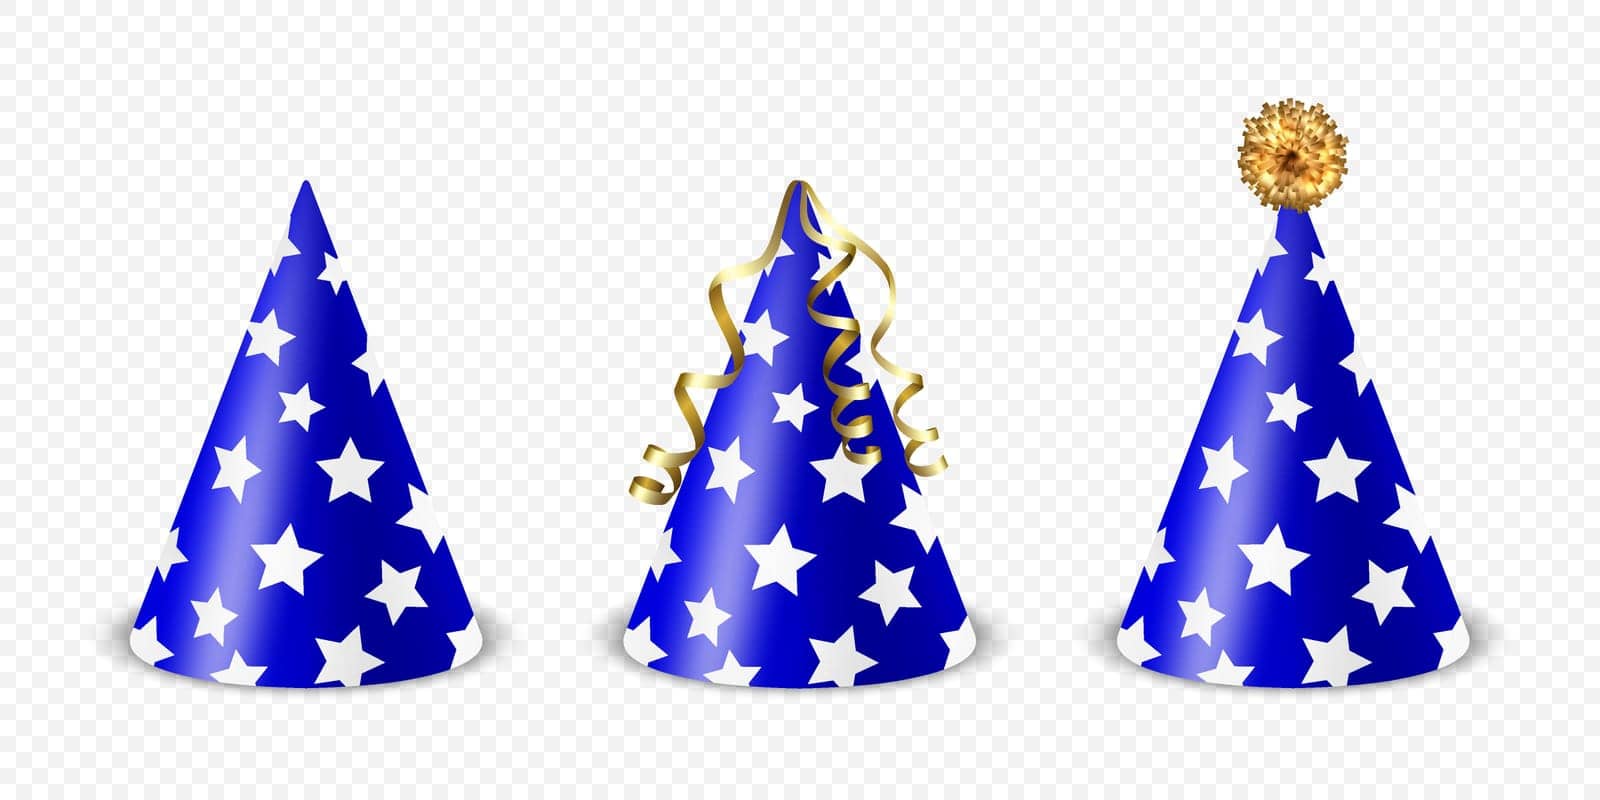 Vector 3d Realistic Blue and White Birthday Party Hat Icon Set Isolated on White Background. Party Cap Design Template for Party Banner, Greeting Card. Holiday Hats, Cone Shape, Front View by Gomolach